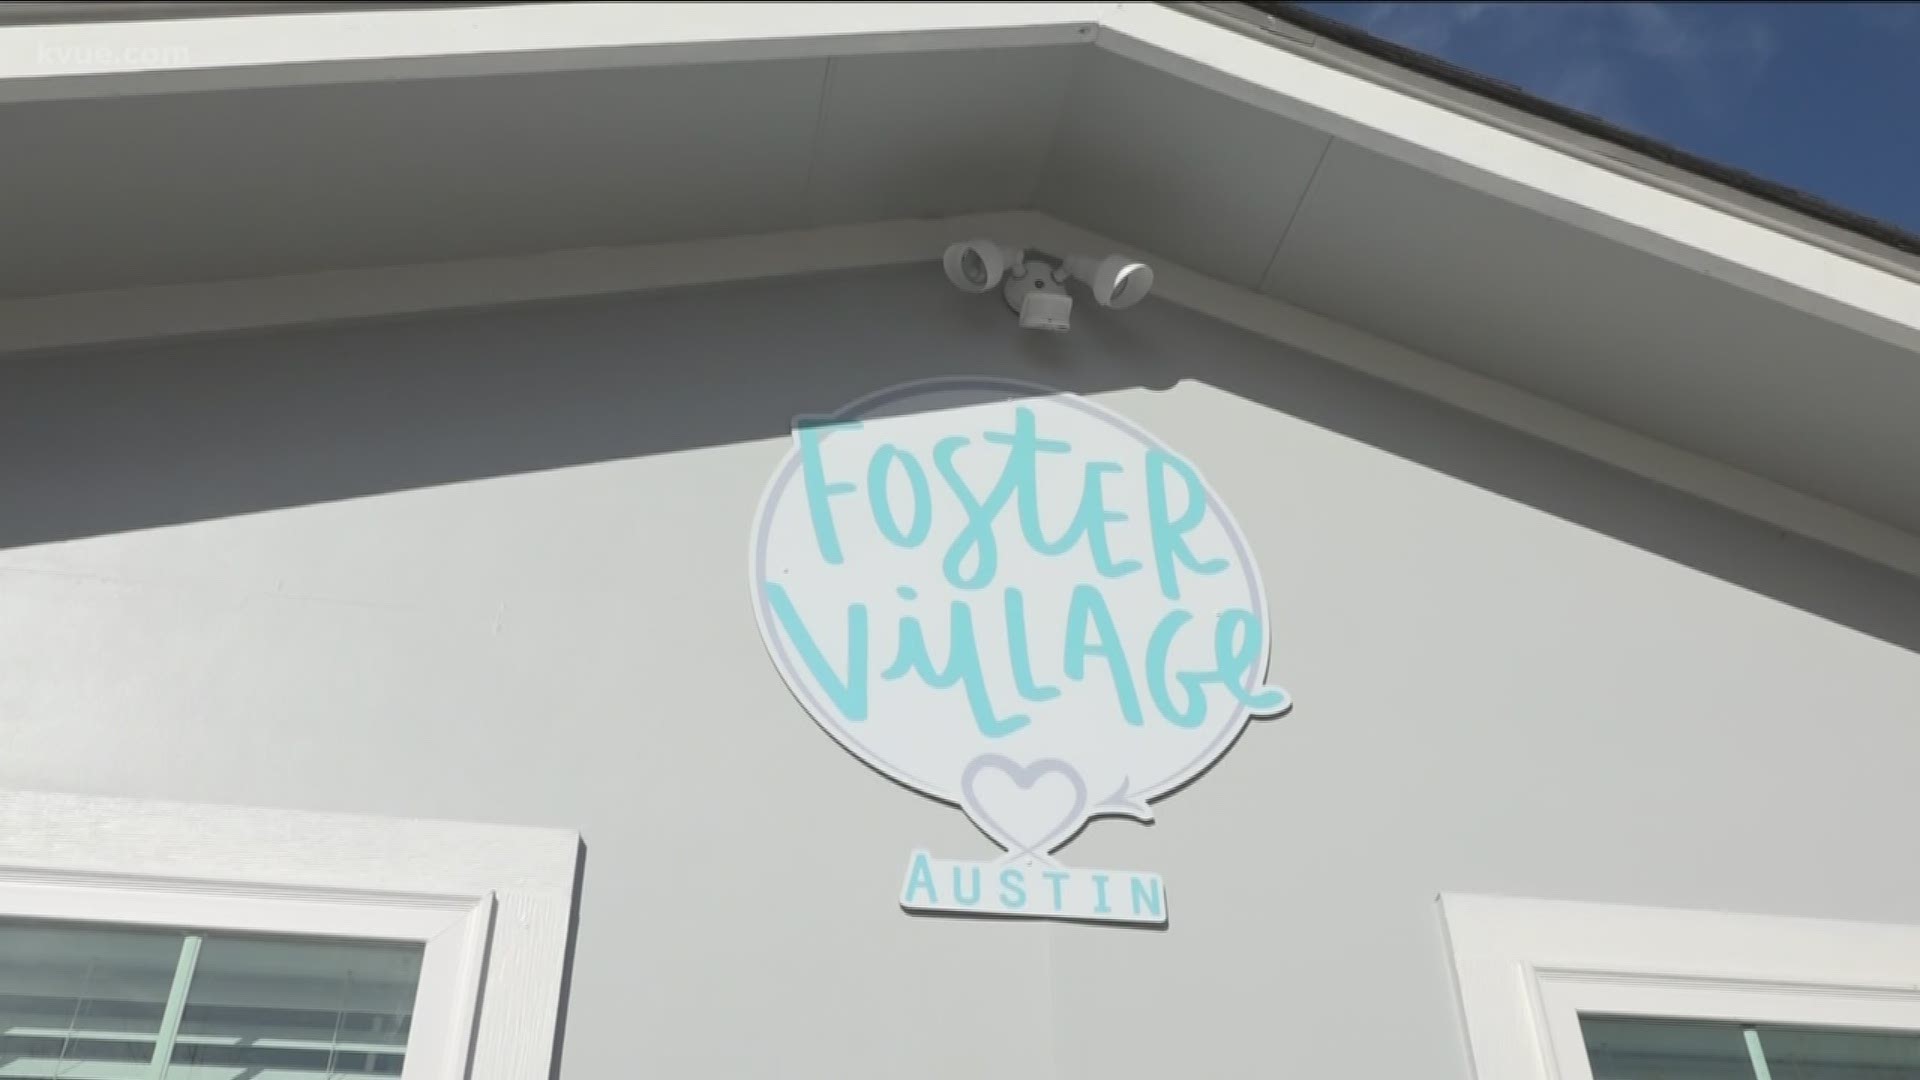 A new center in North Austin aims to help families in the foster care system.